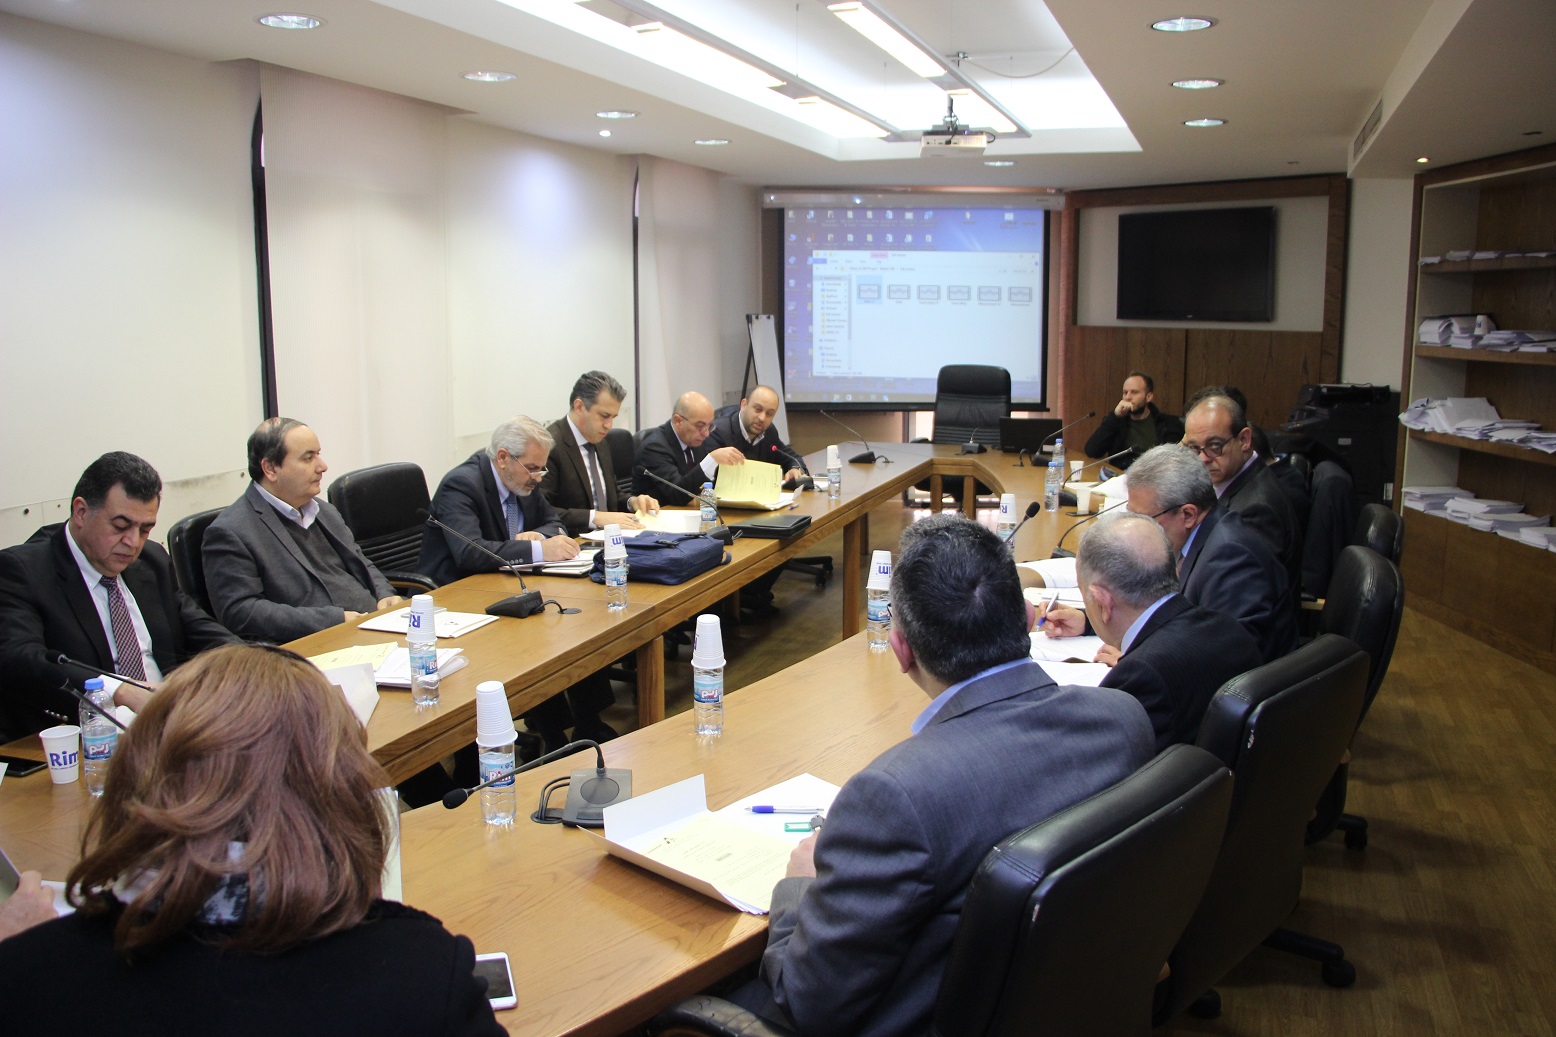 Fourth Steering Committee Meeting of the project “Building a rule of law society"